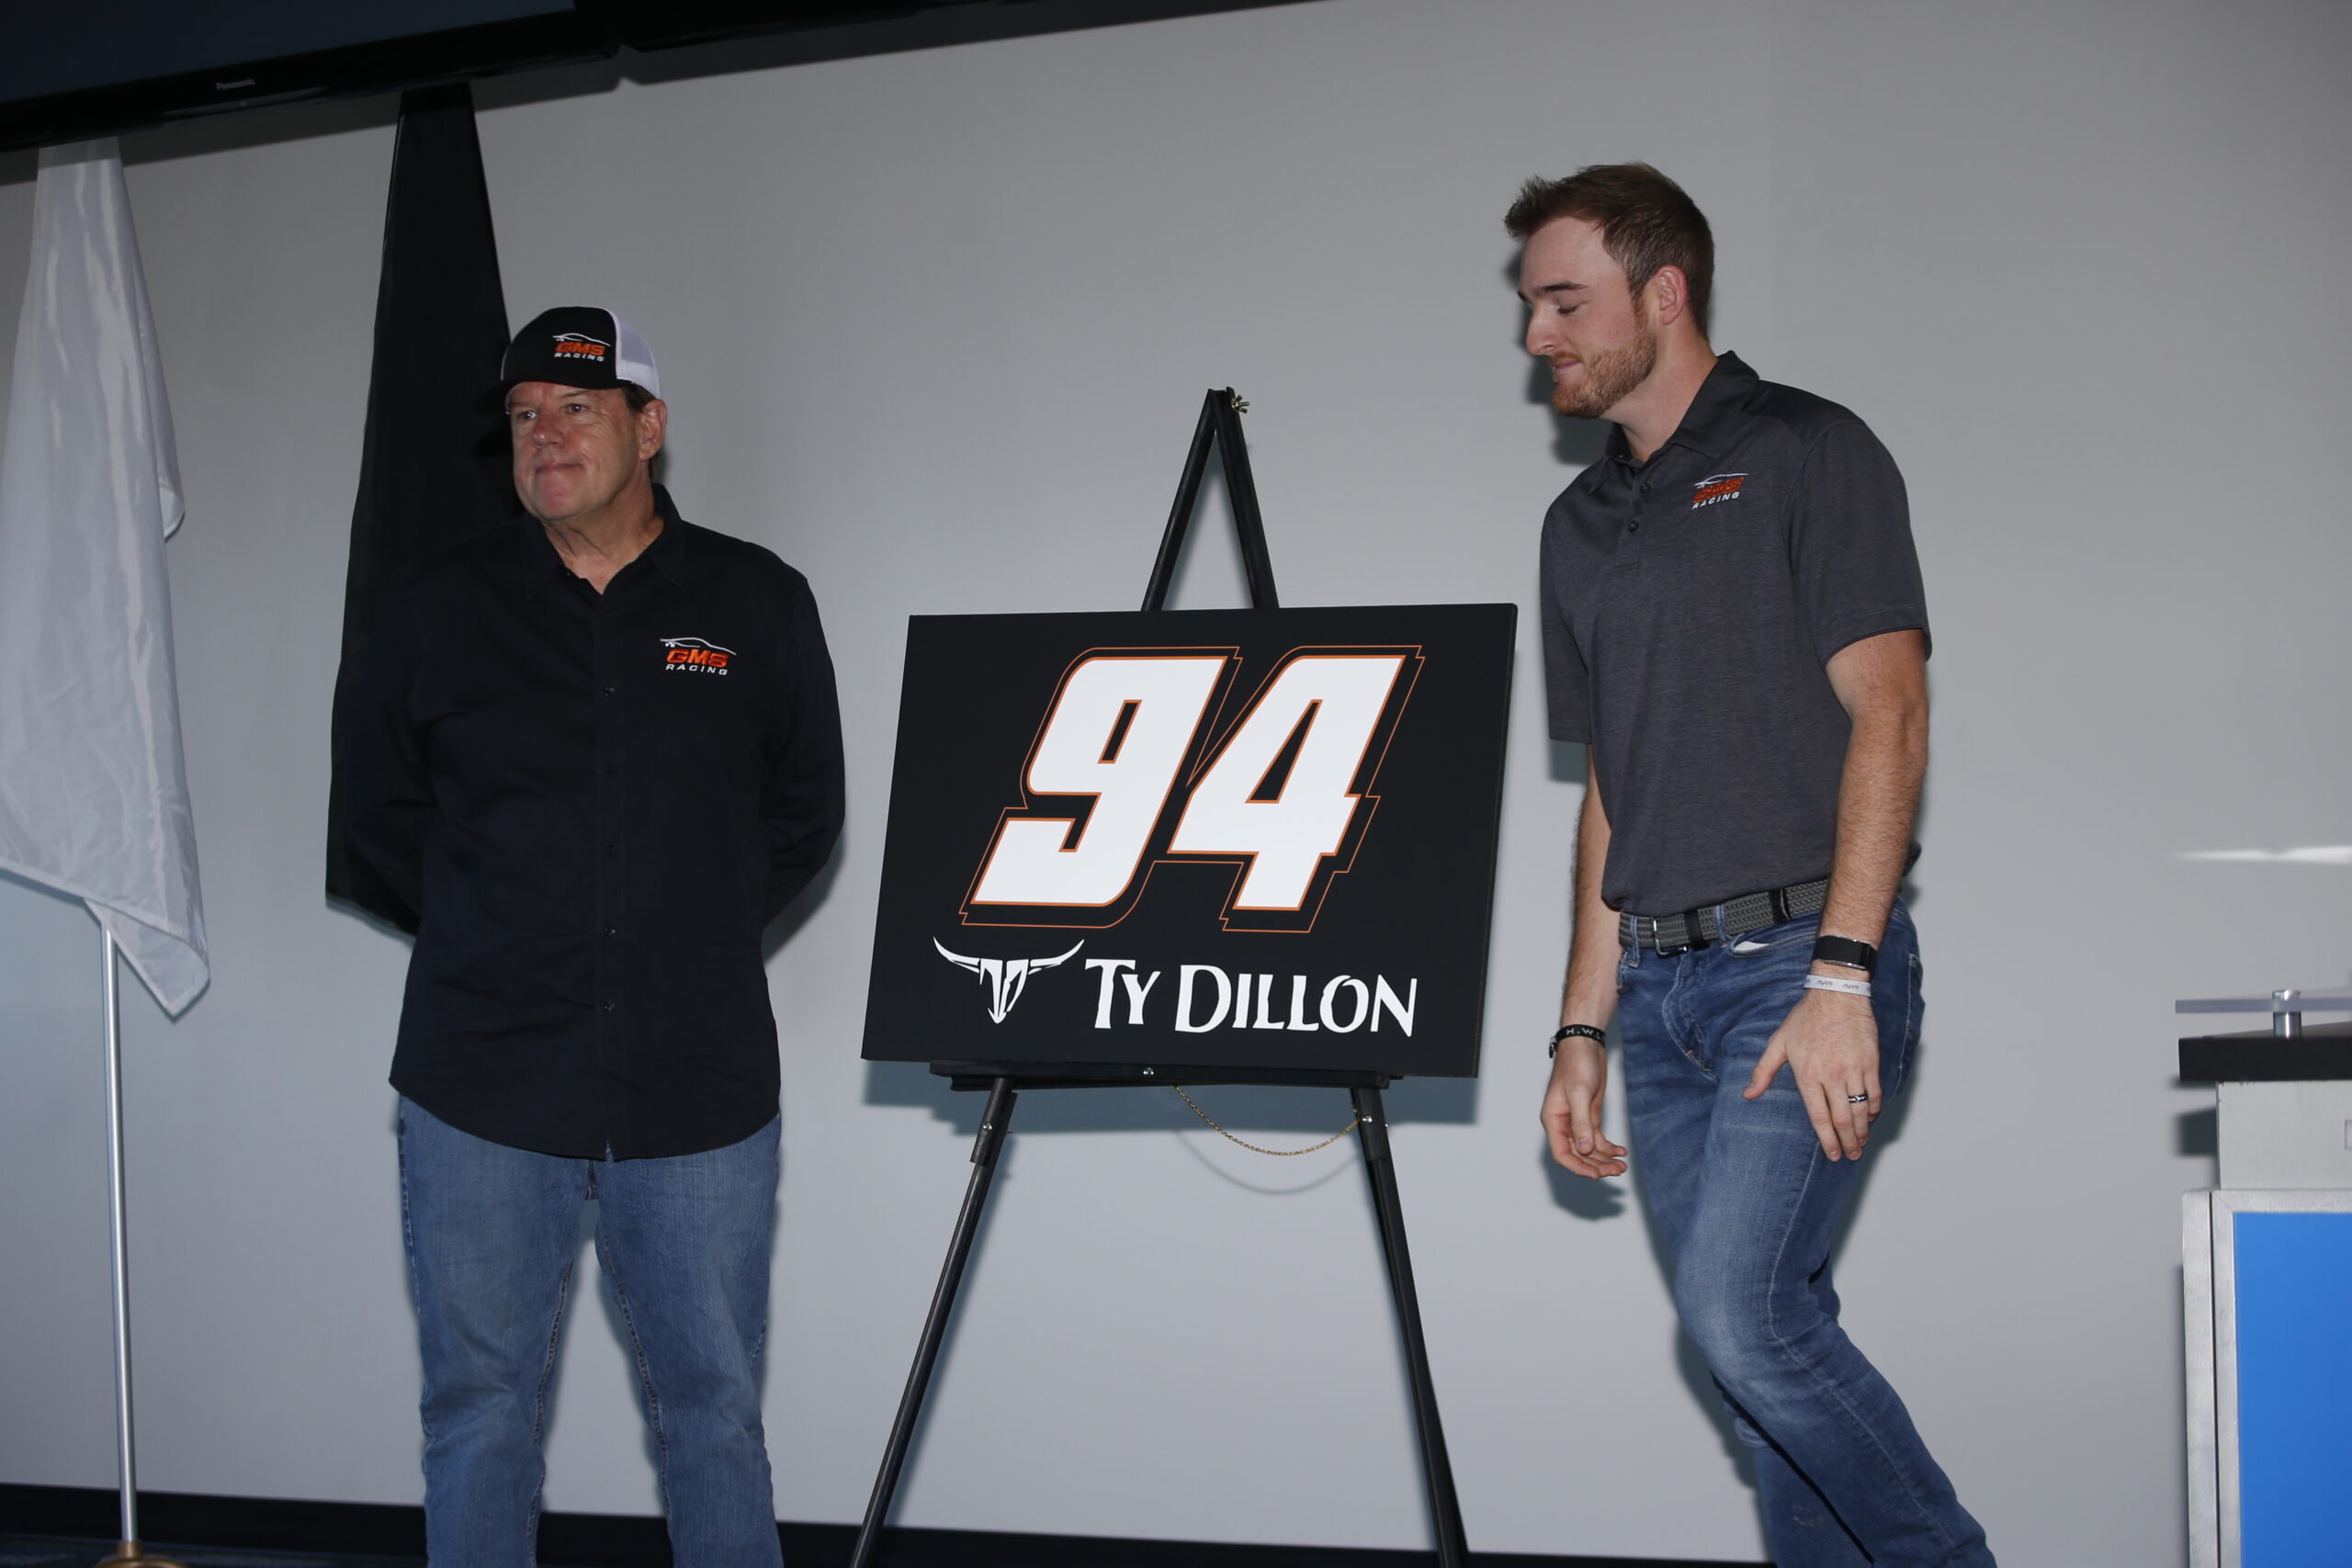 It's the return of Mike Beam and Ty Dillon in the Cup Series. (Photo: Stephen Conley | The Podium Finish)